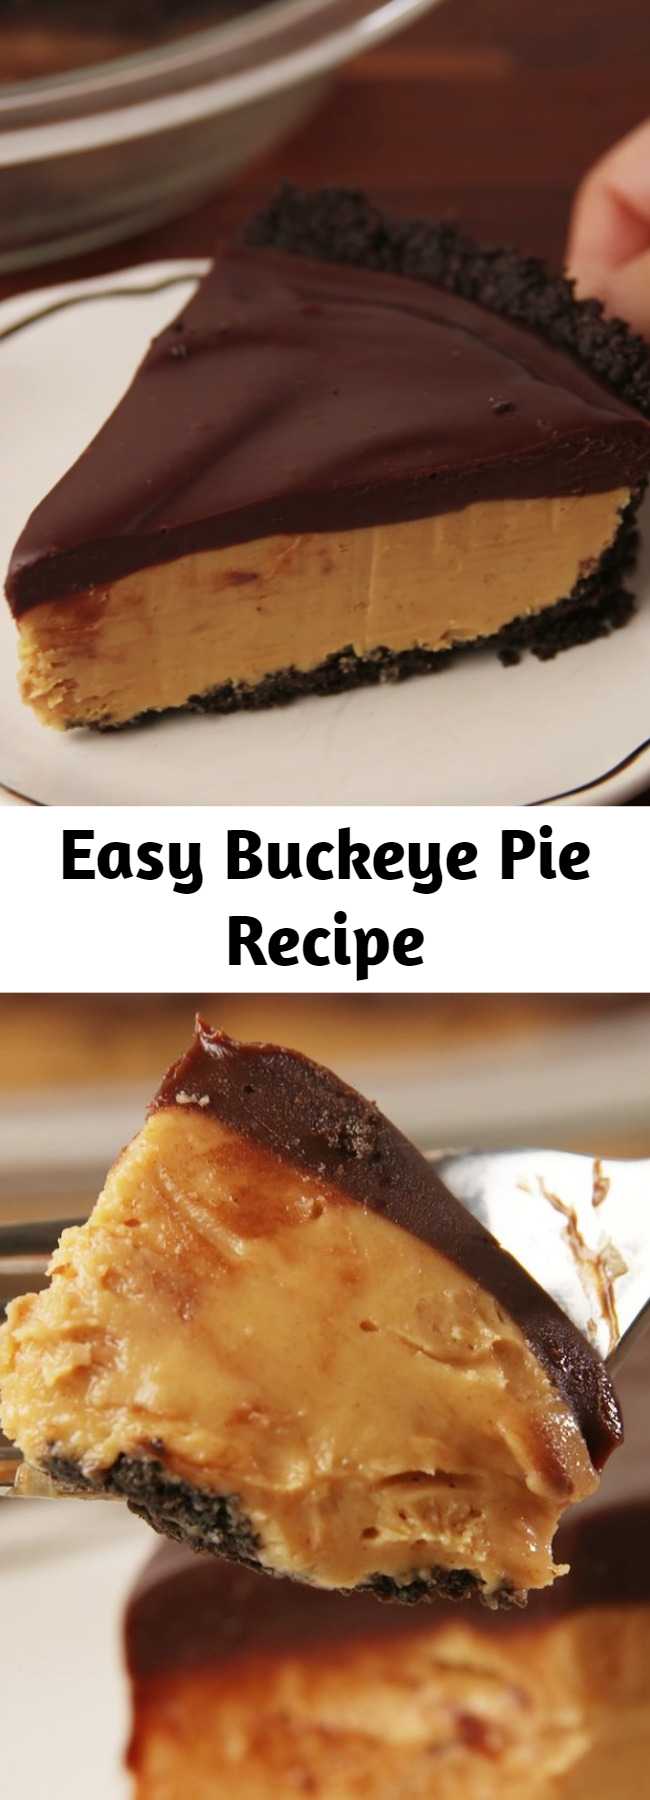 Easy Buckeye Pie Recipe - If you love peanut butter and chocolate, you'll really love this pie. It's rich enough for a holiday dessert, but also no bake, so you can make it all summer. #food #pastryporn #comfortfood #kids #easyrecipe #recipe #inspiration #ideas #diy #home